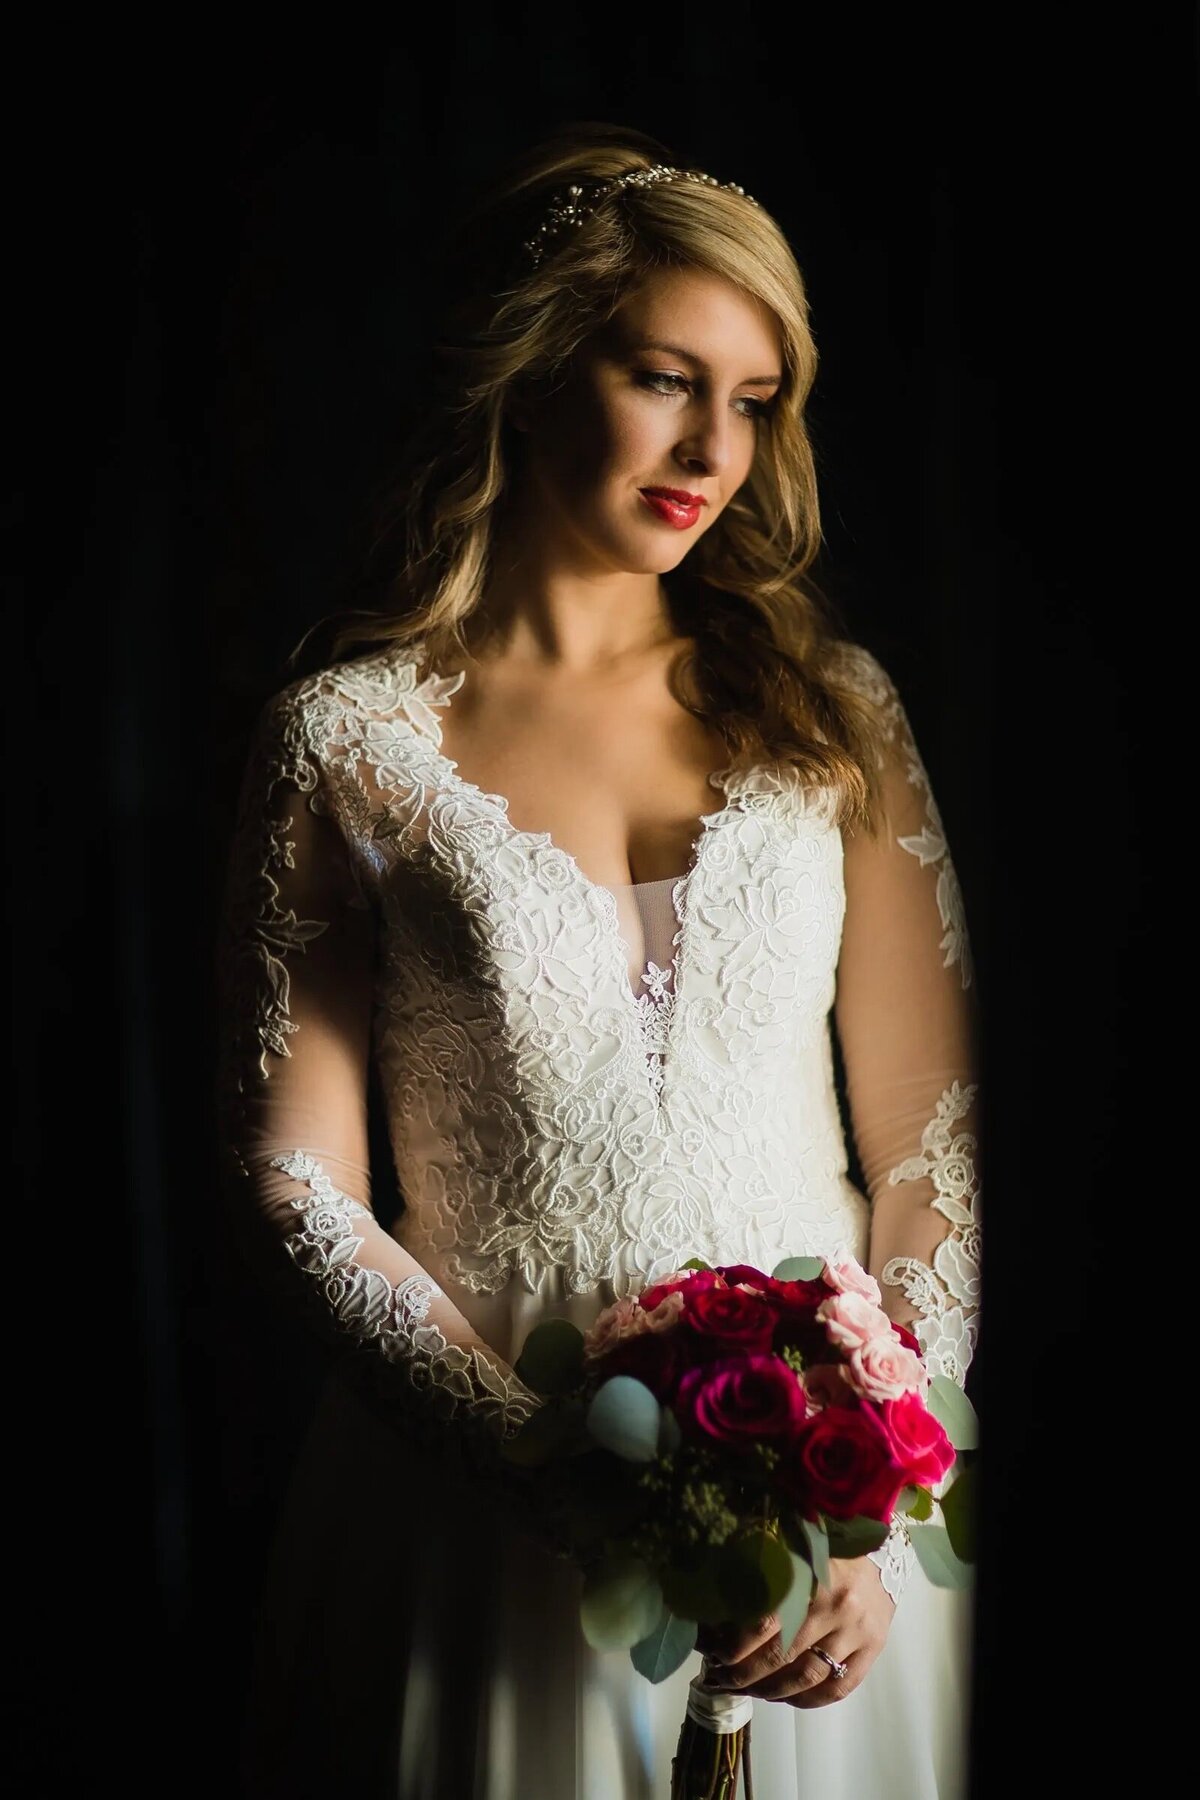 A bride holding a bouquet and looking down